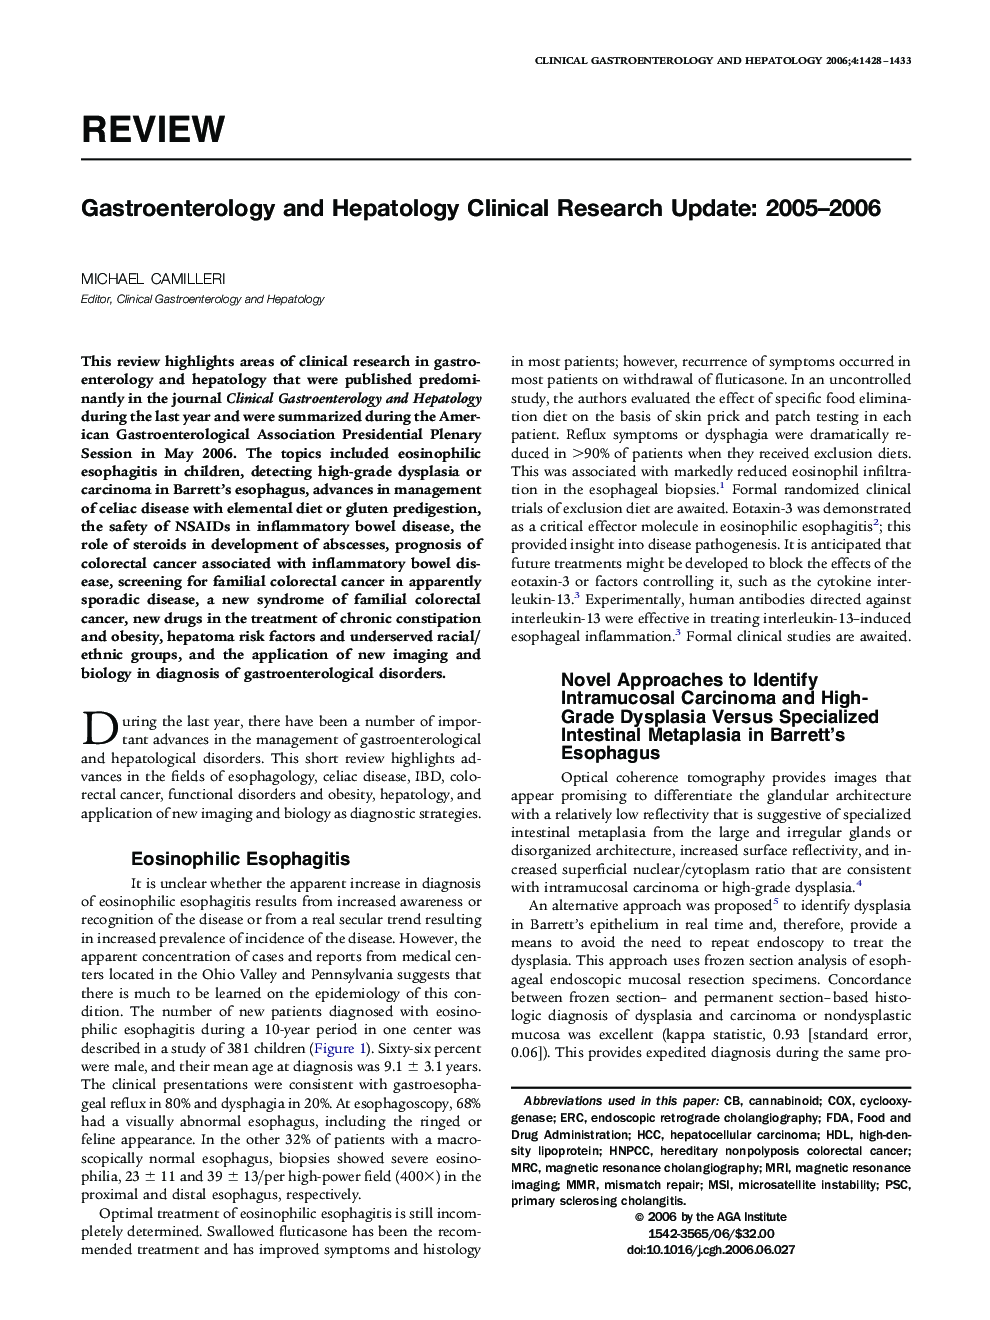 Gastroenterology and Hepatology Clinical Research Update: 2005-2006